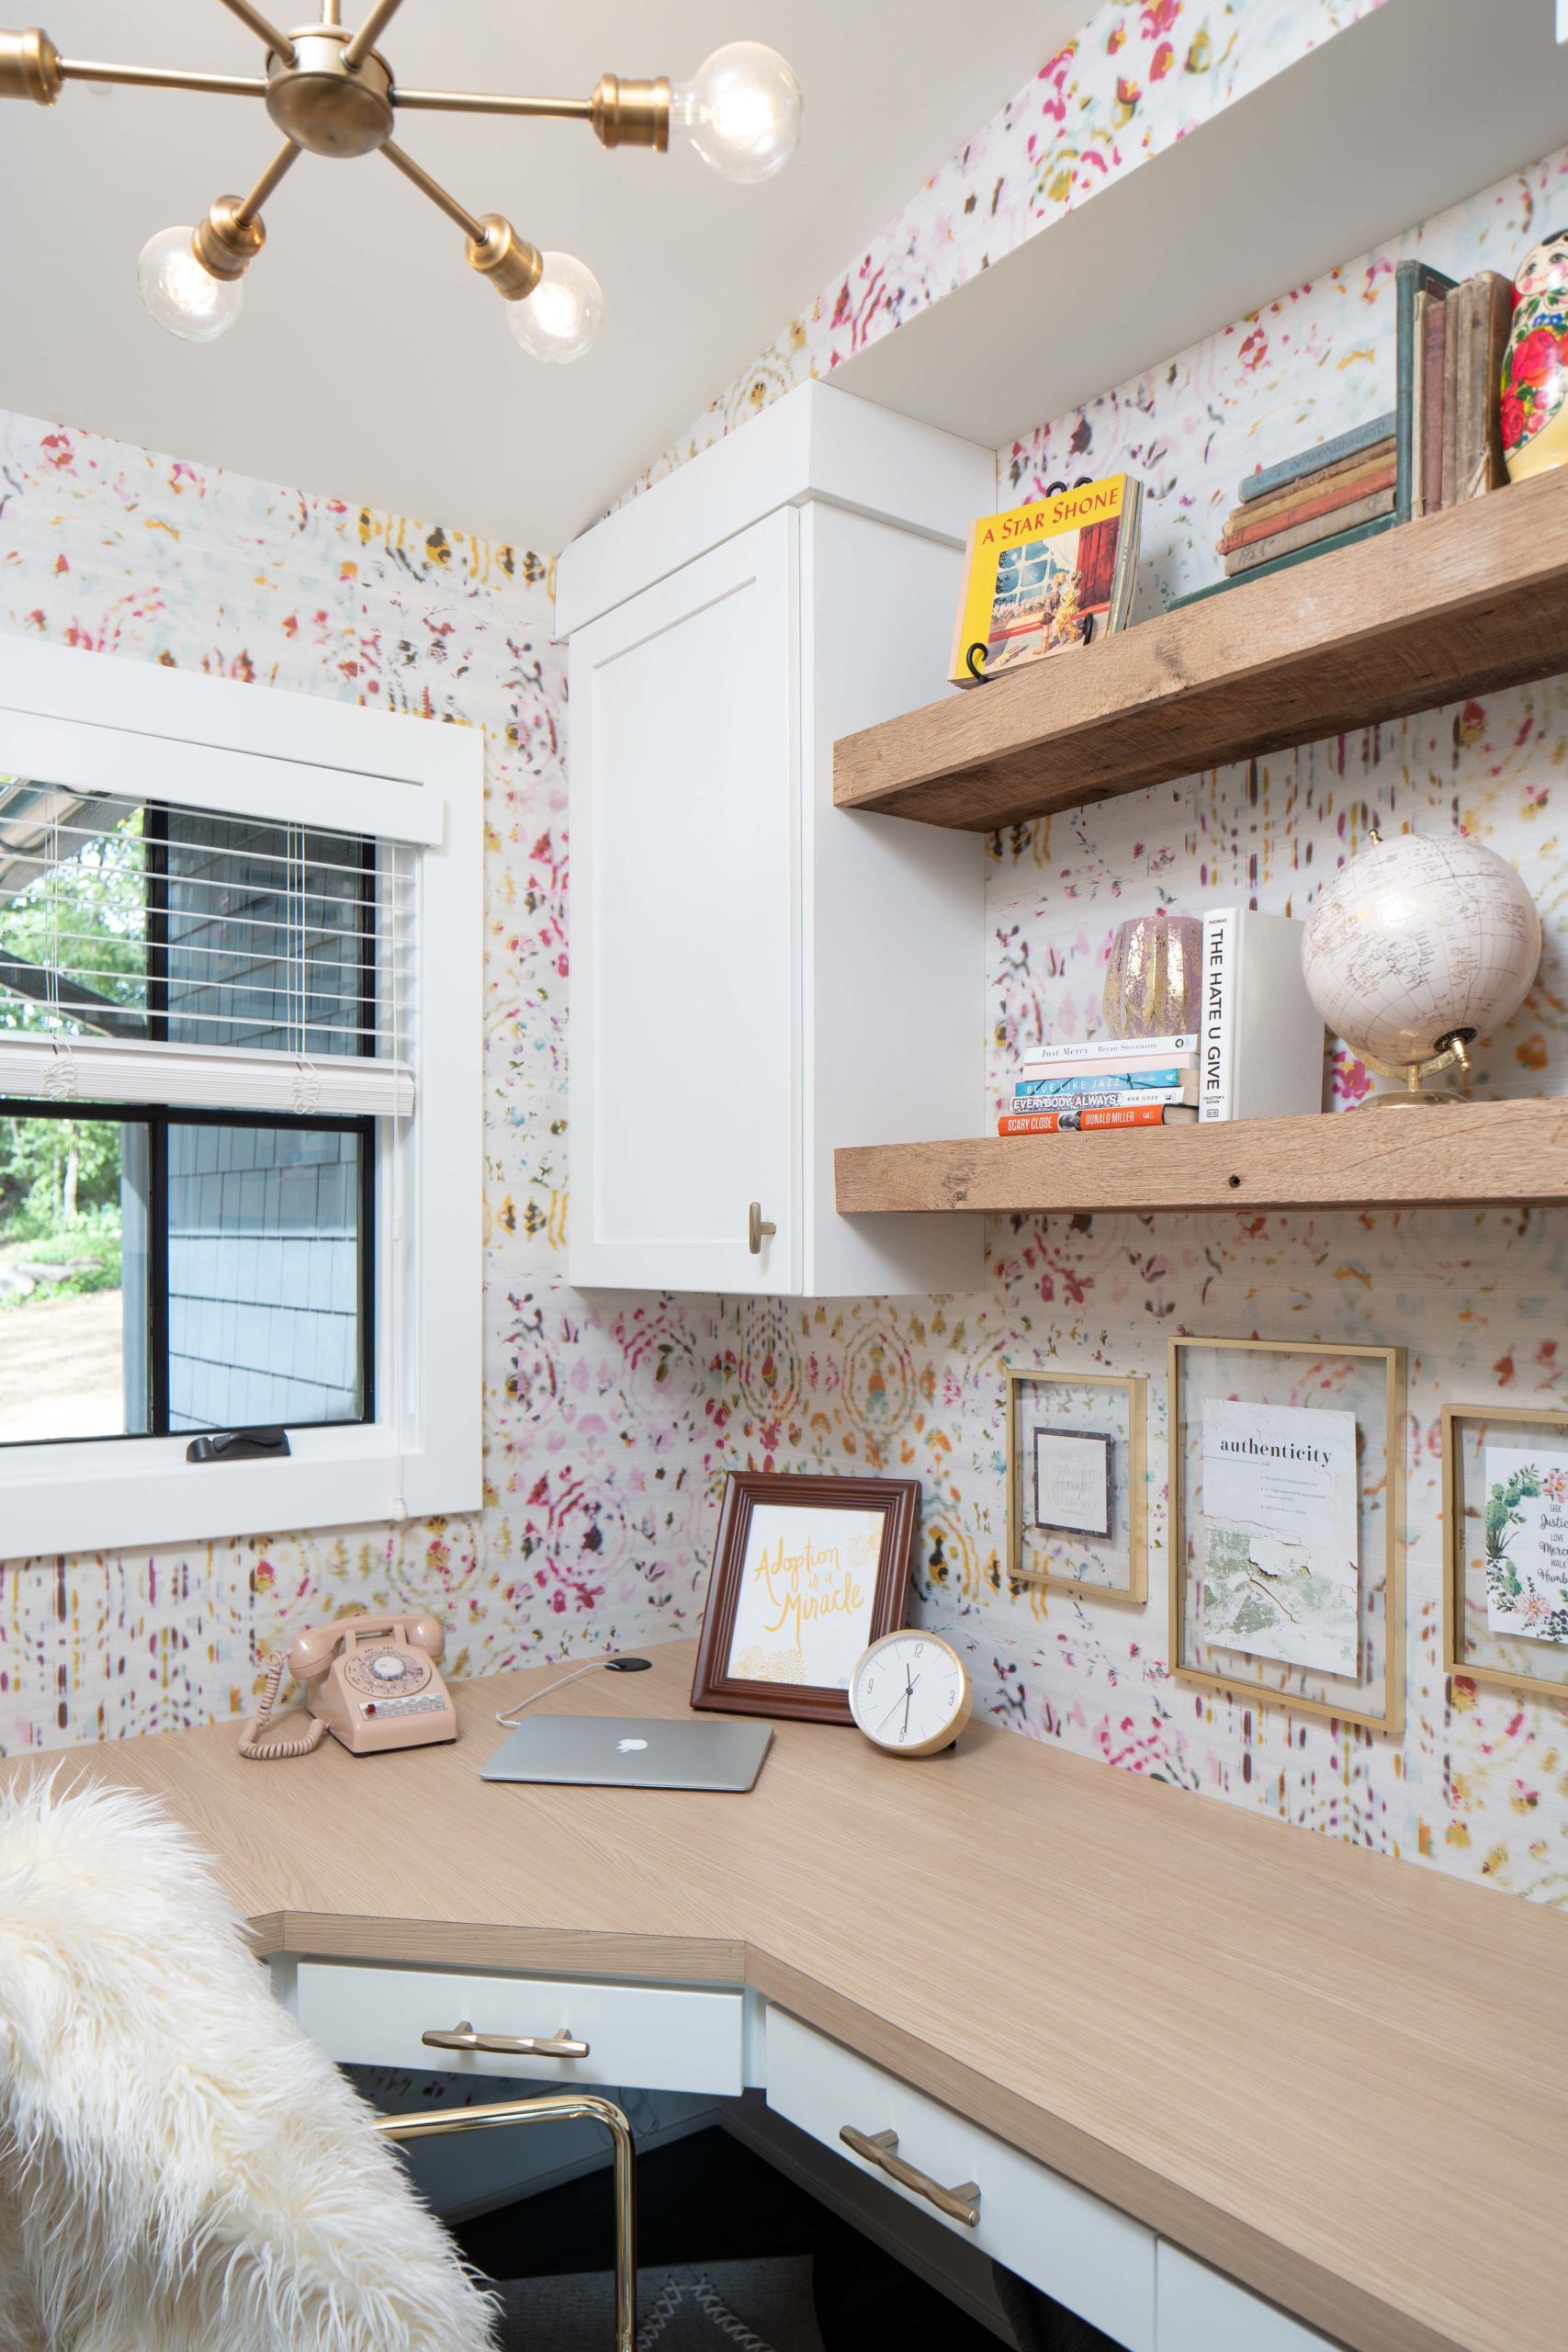 A home office with floral wallpaper and a furry chair.